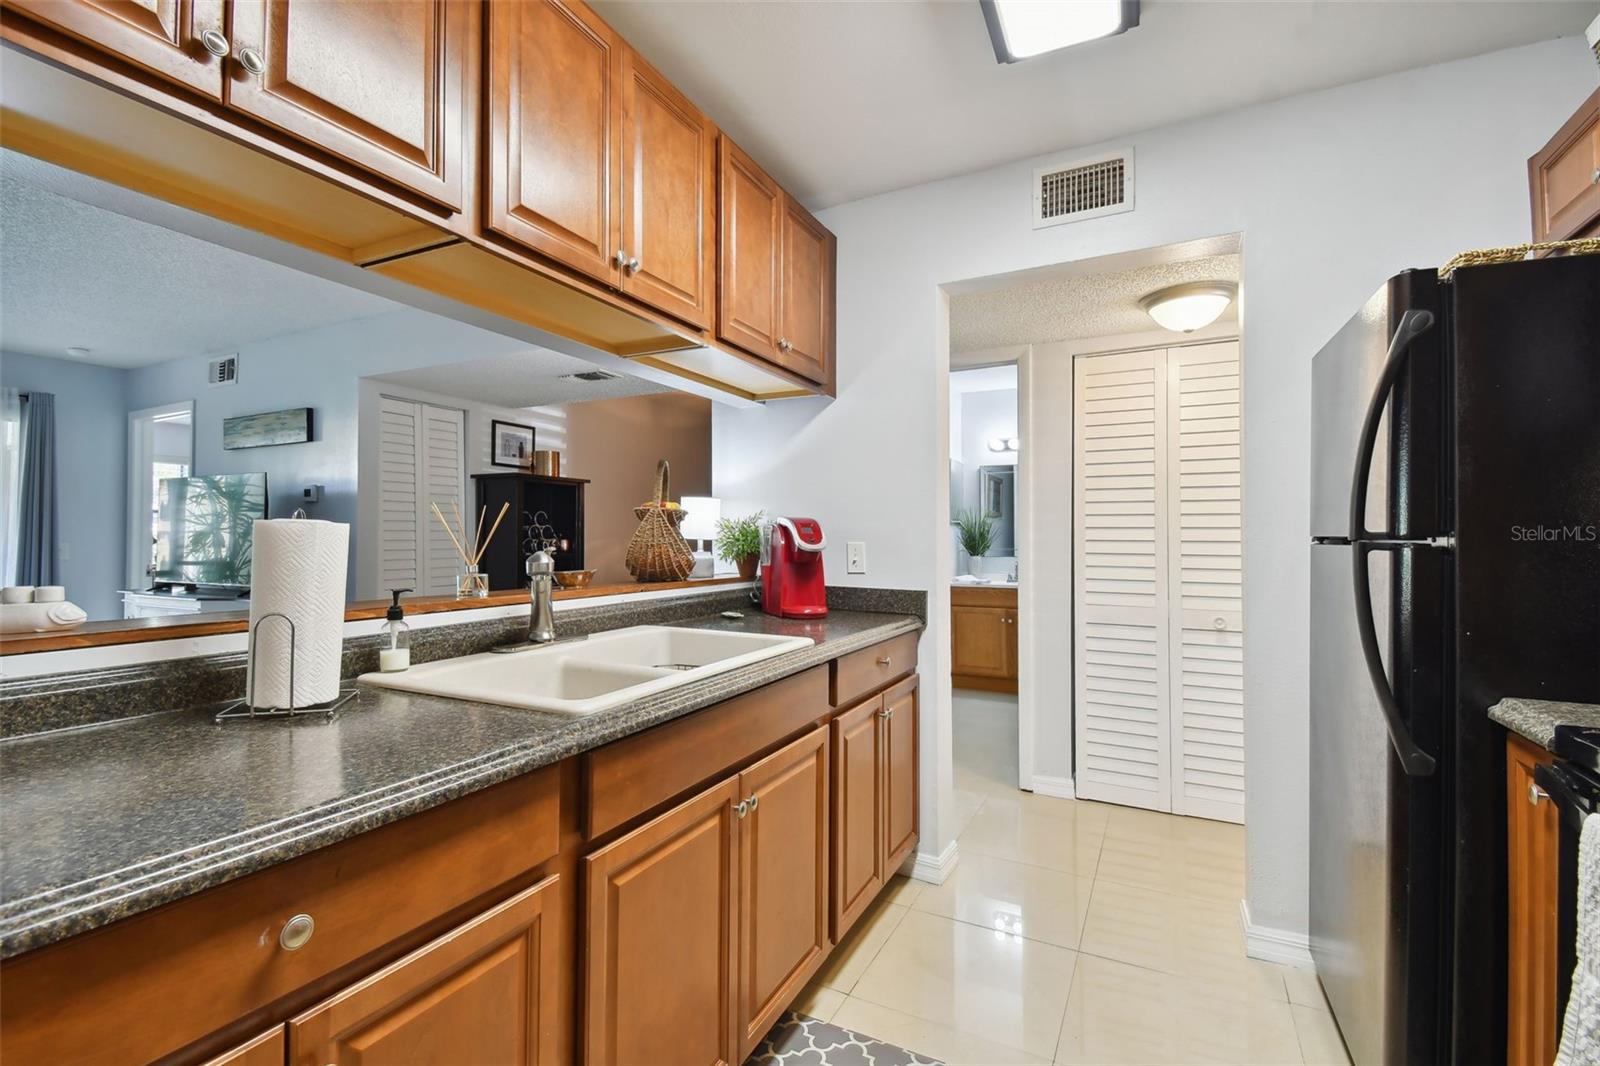 Spacious kitchen with granite counter tops and plenty of cupboard space.